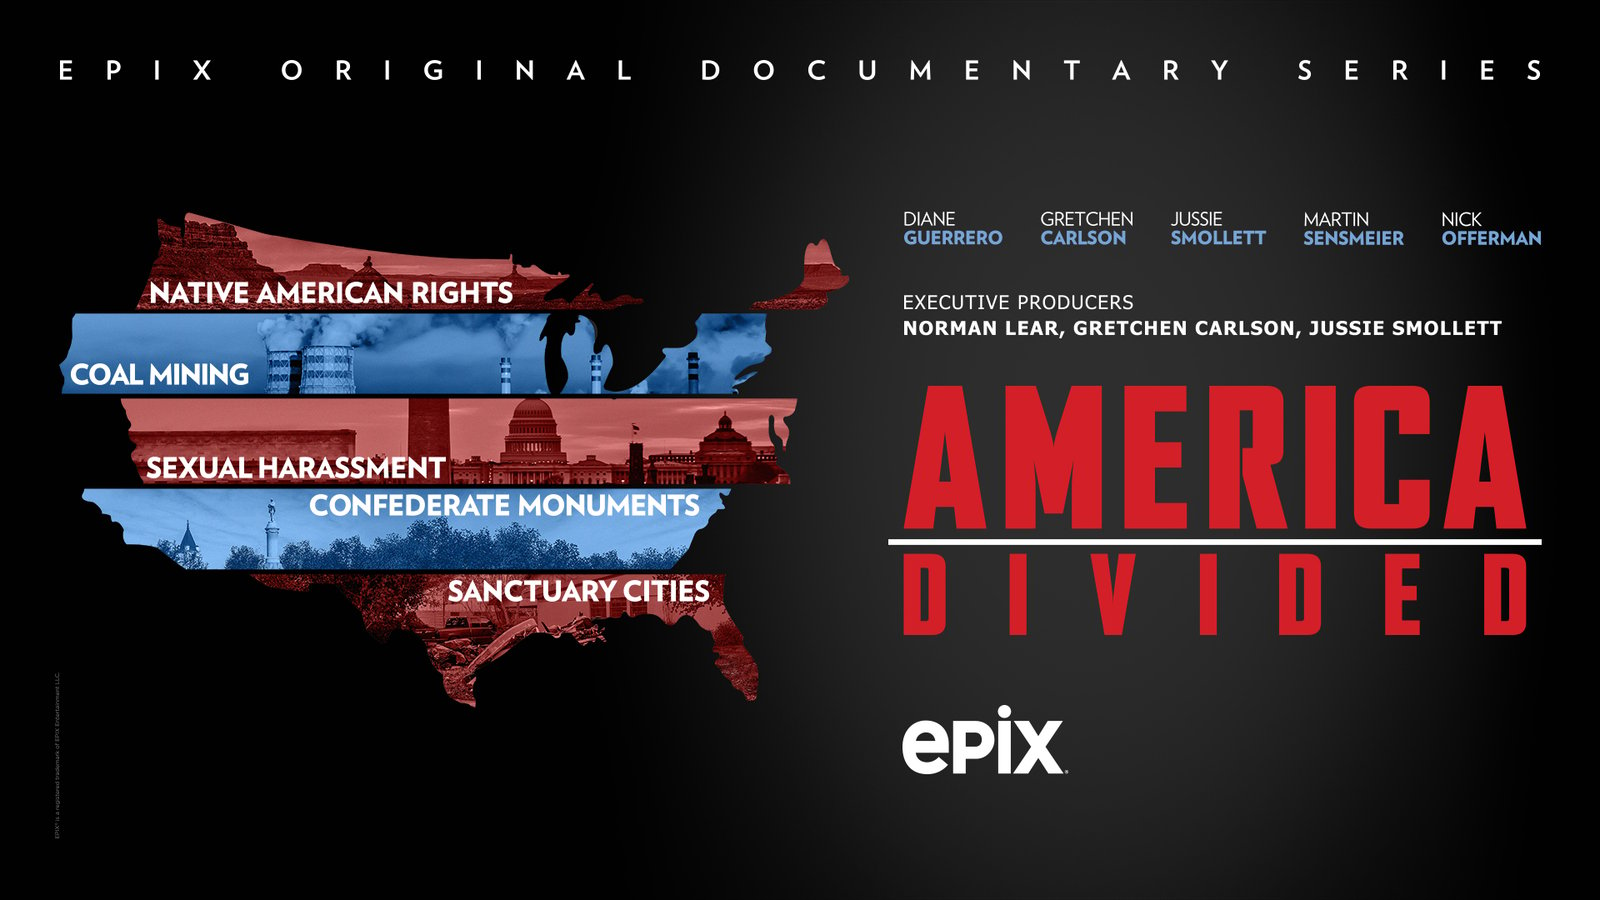 America Divided Season Two - In a Divided Country, Our Stories Unite Us